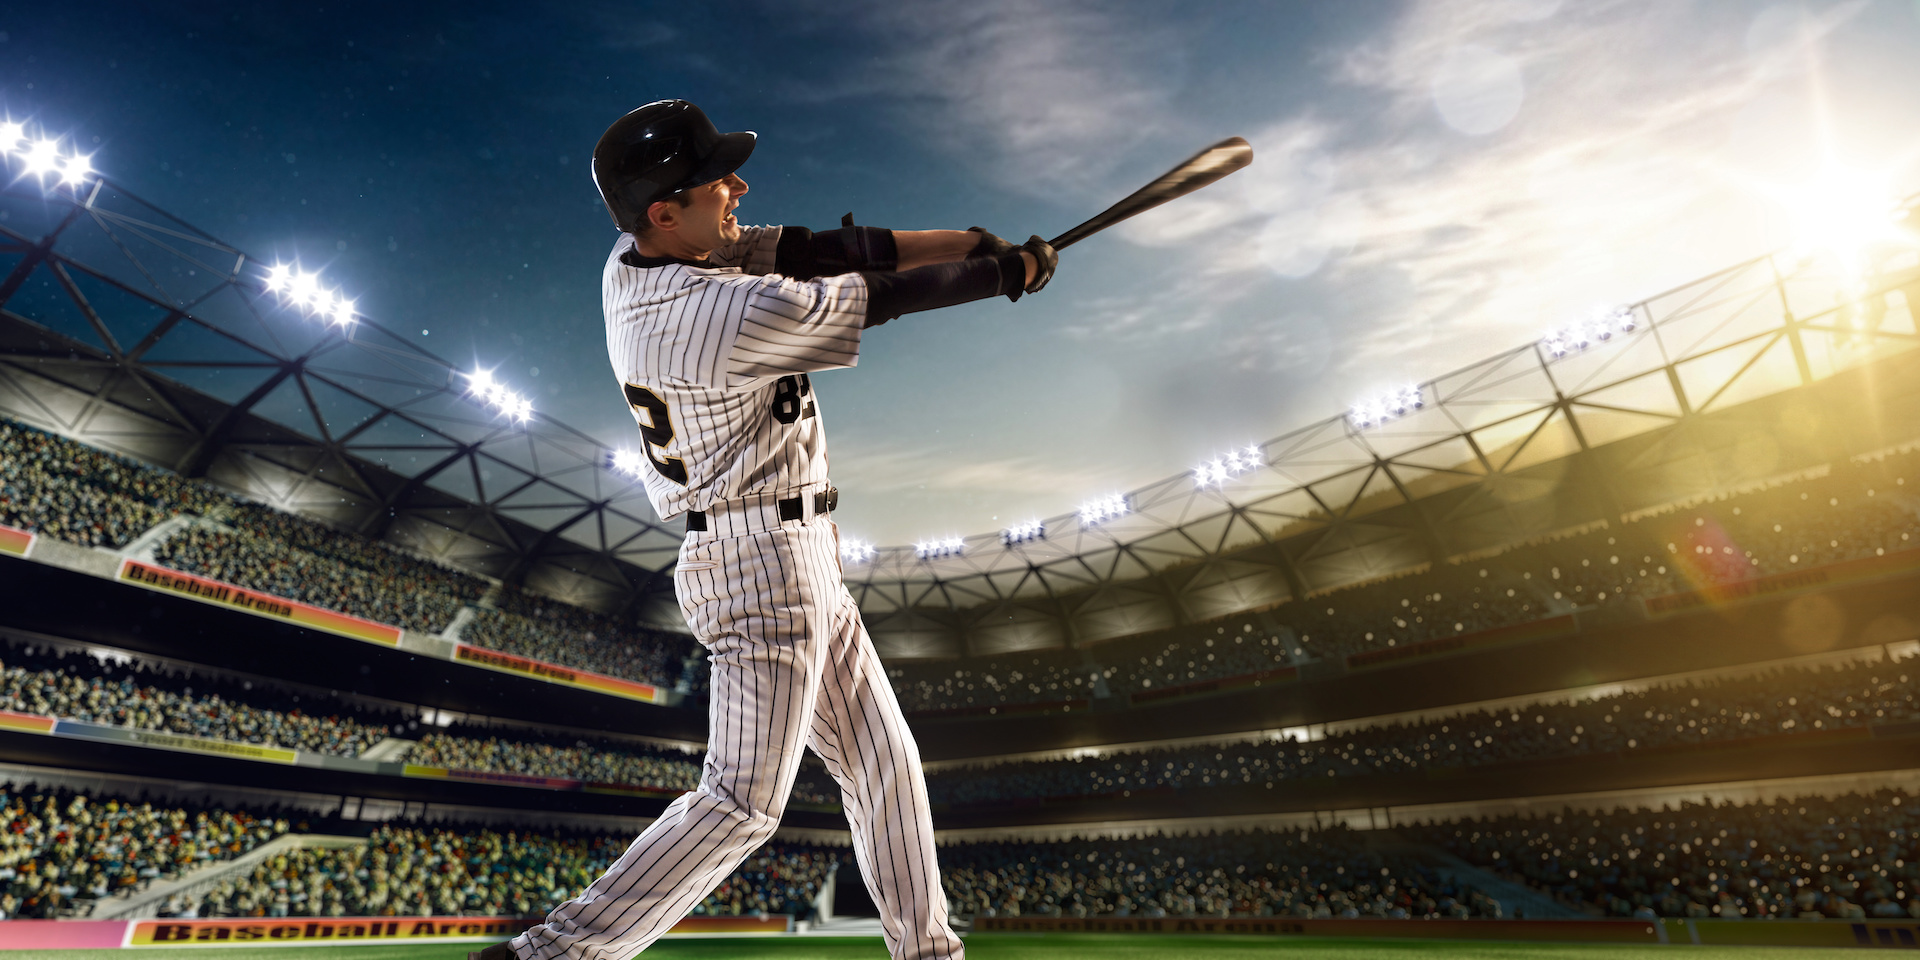 Hit A Home Run In Real Estate With The Right Financing & Property Management On Your Team